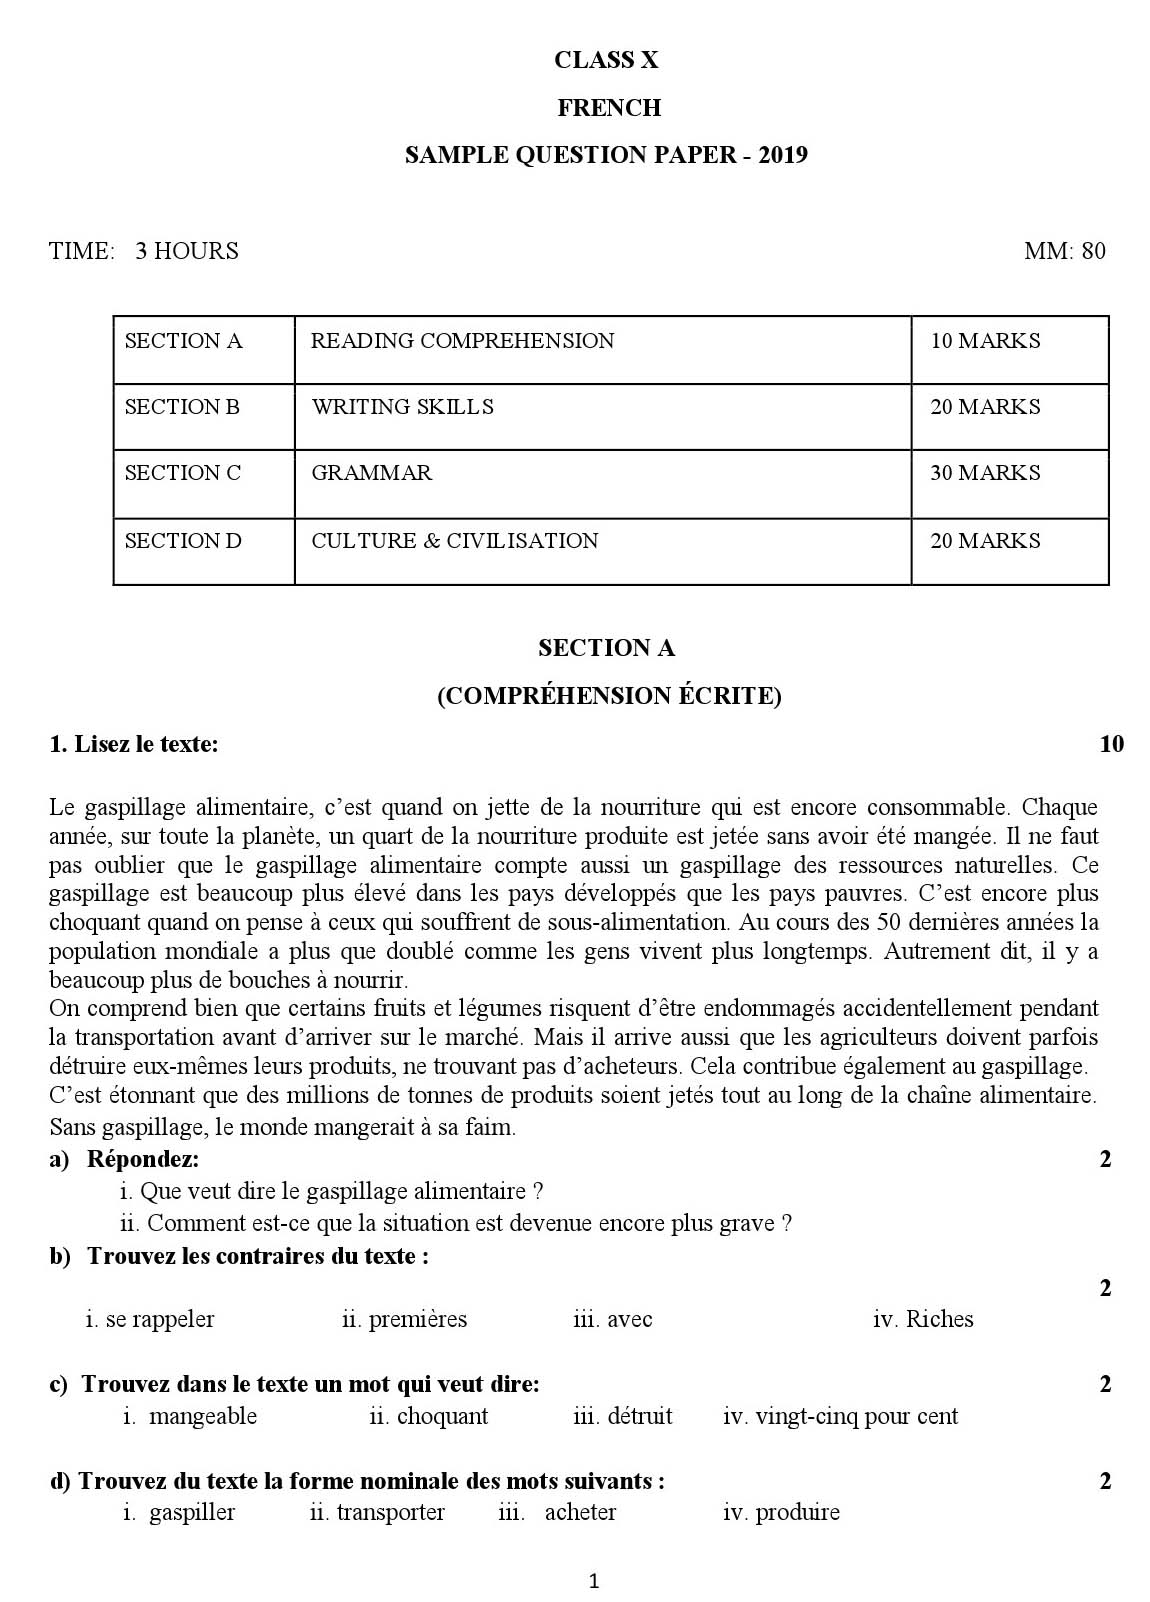 French CBSE Class X Sample Question Paper 2018-19 - Image 1